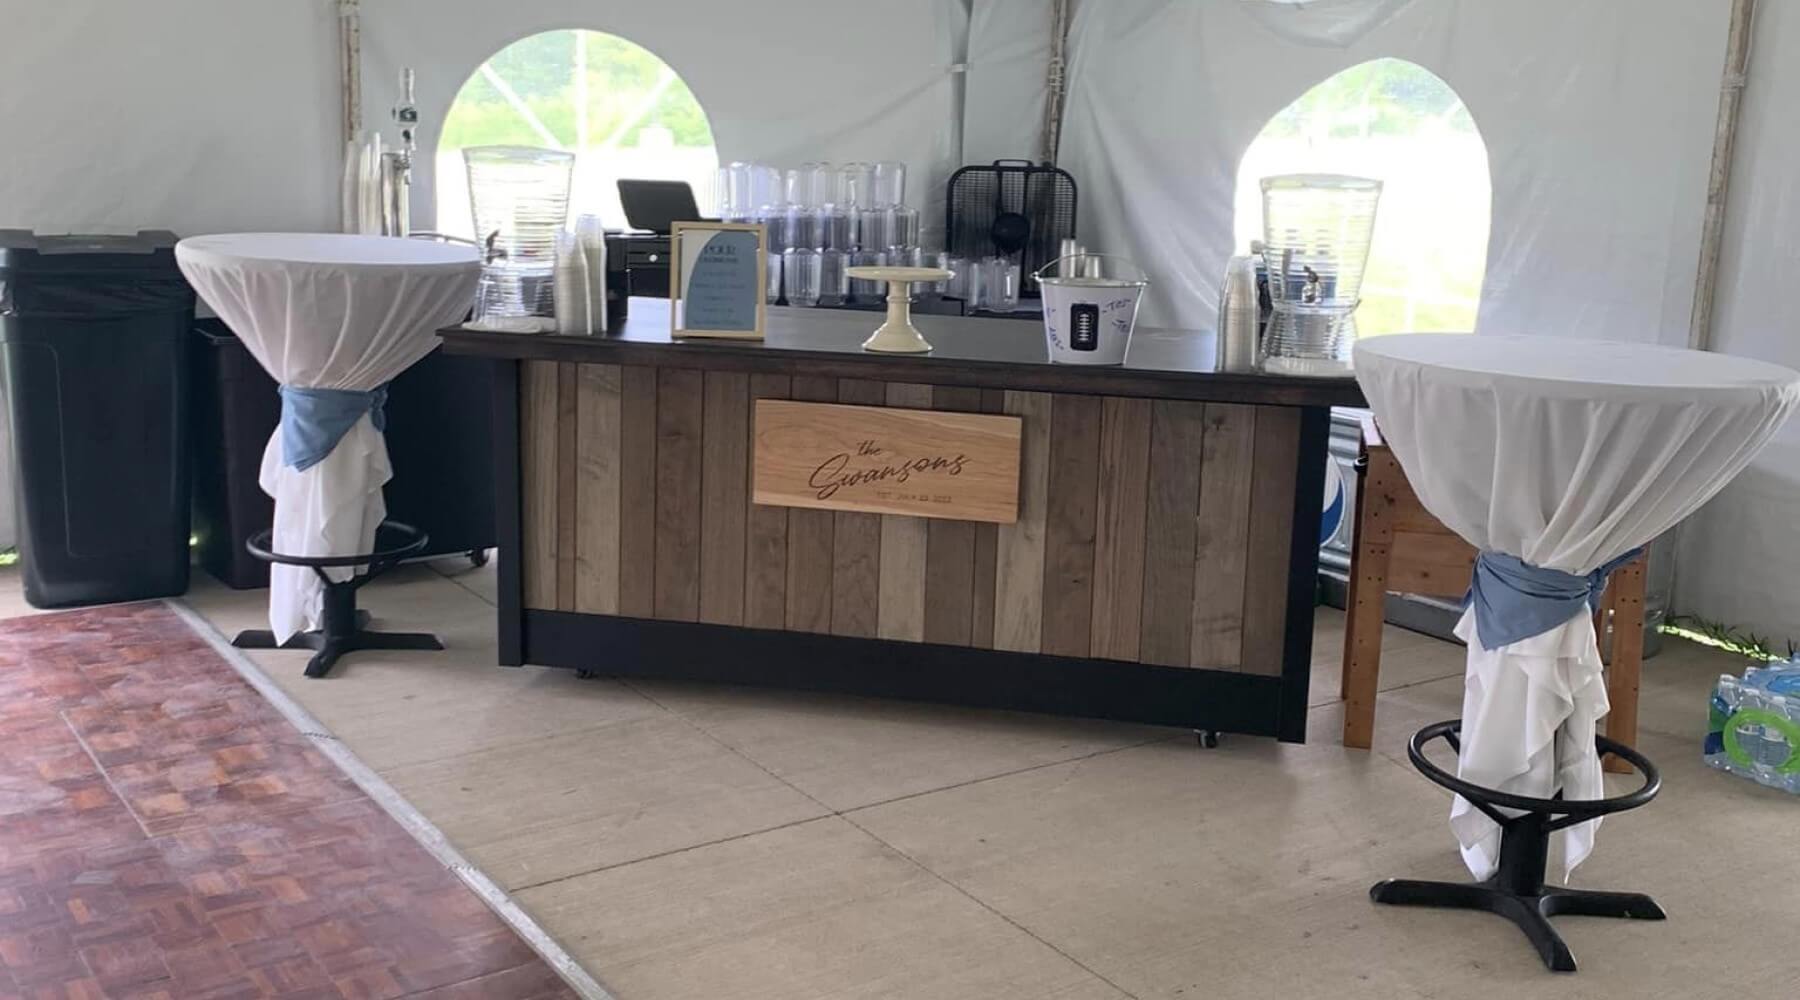 A pop-up style bar in a wedding tent